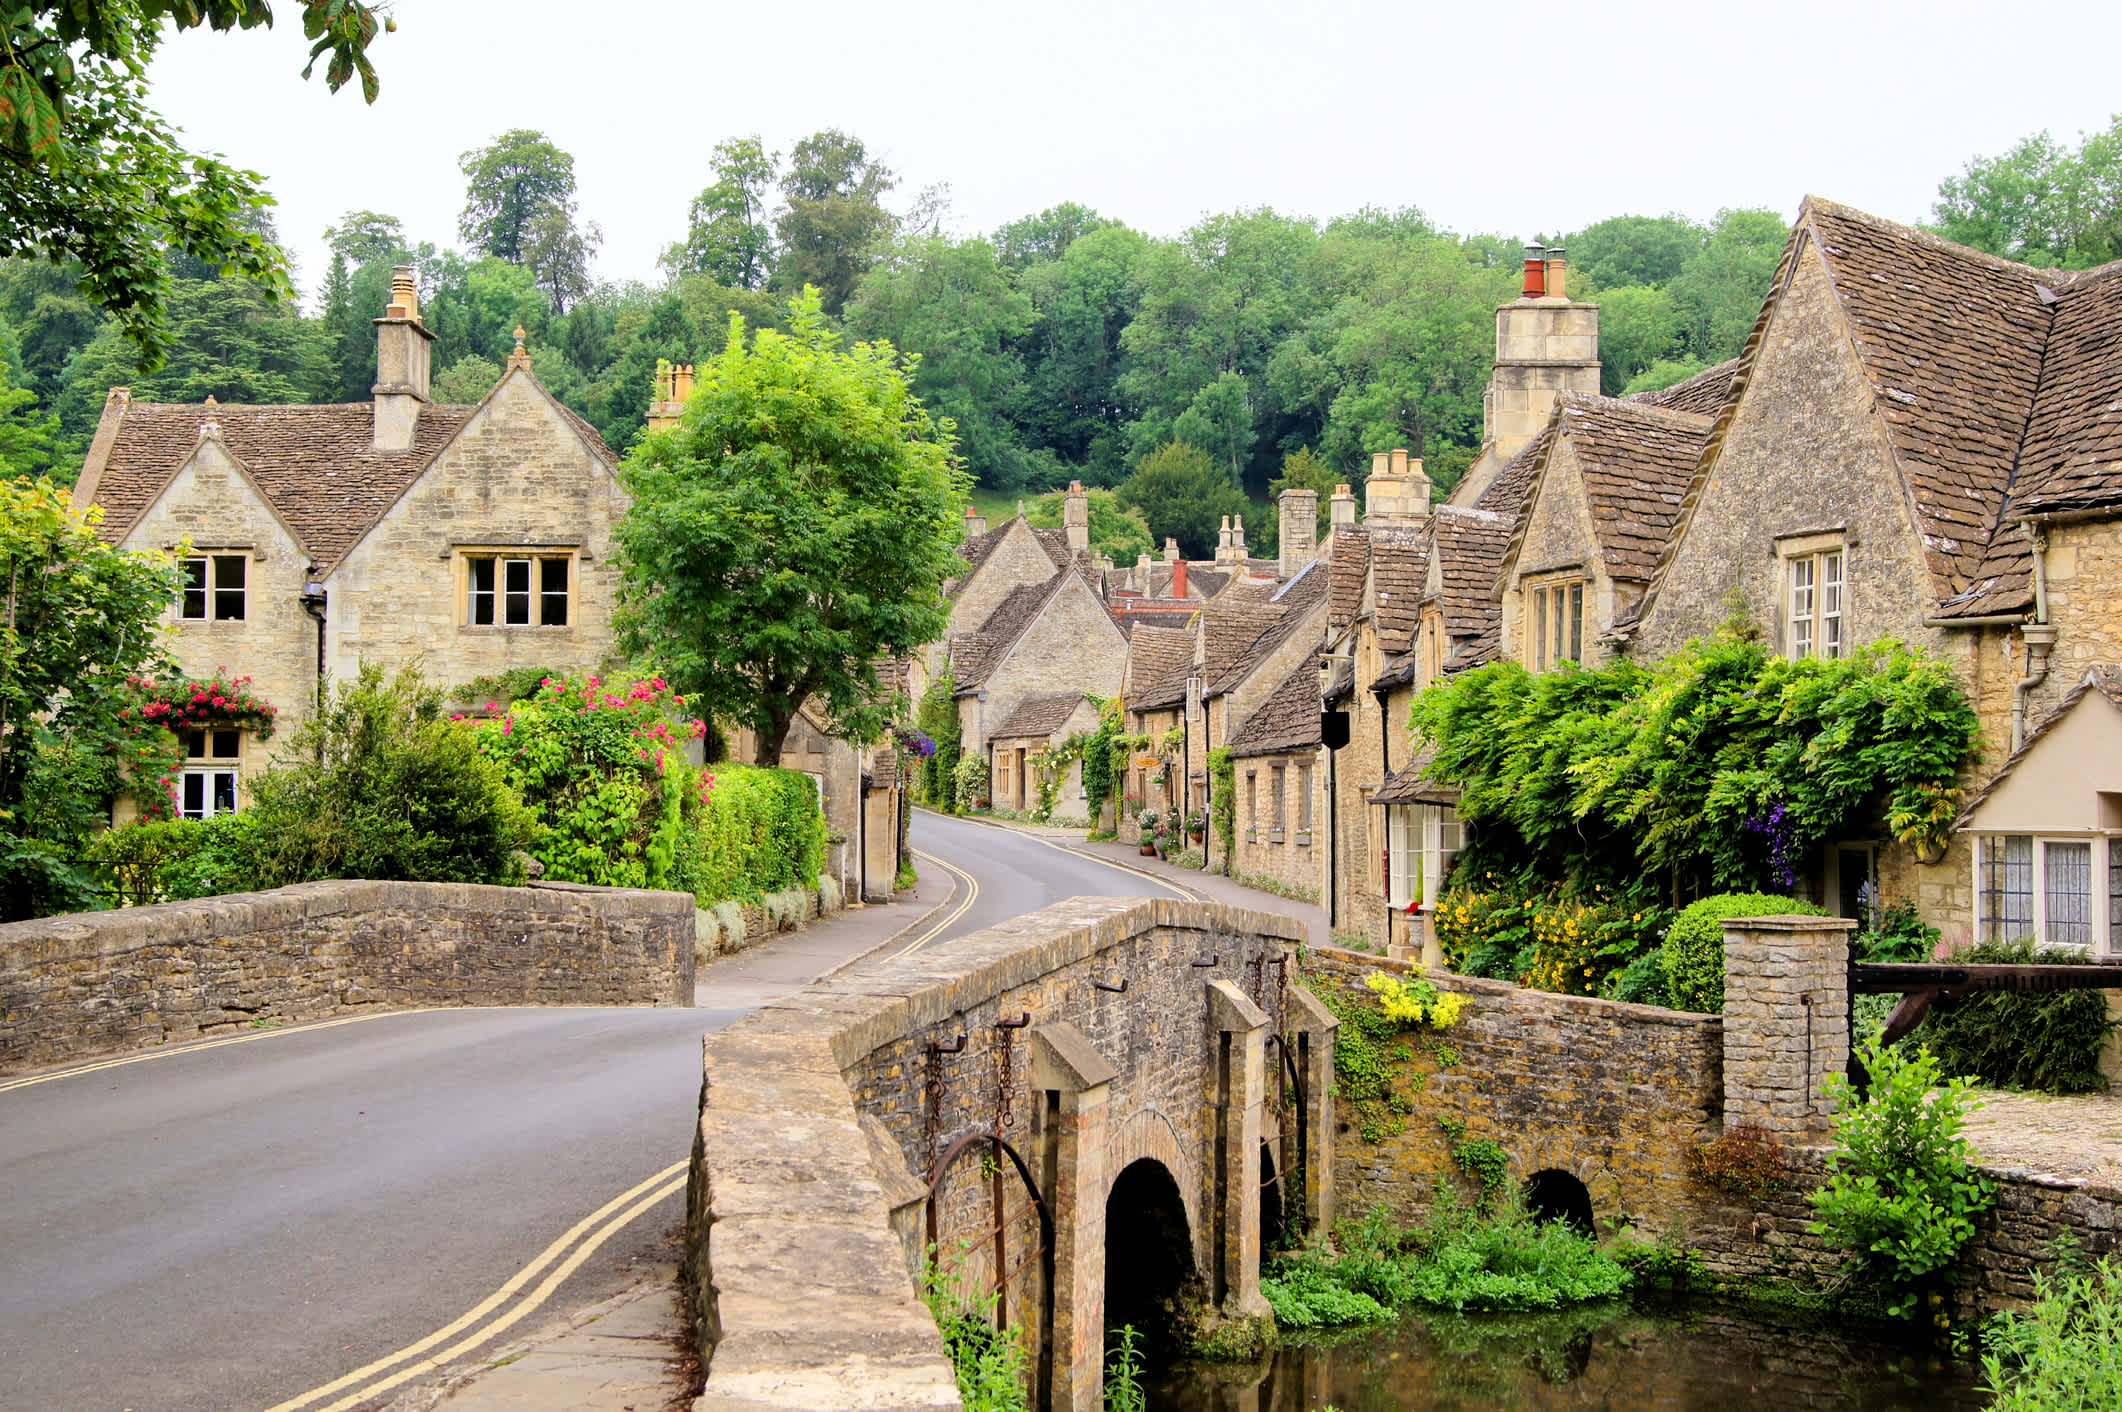 Picturesque Cotswold village of Castle Combe, England, United Kingdom.

